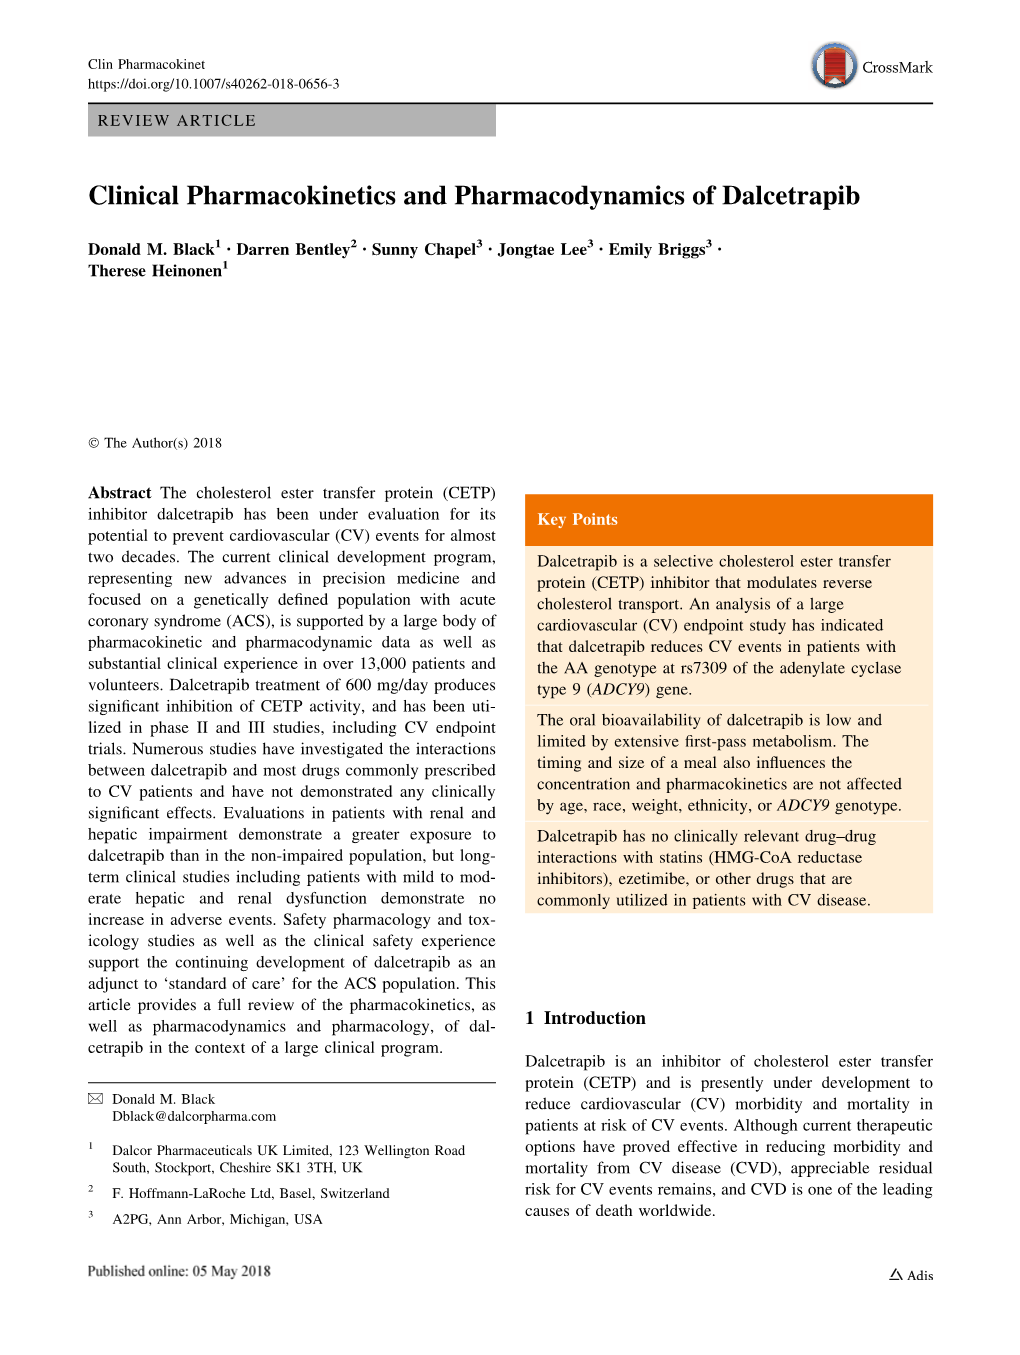 Clinical Pharmacokinetics and Pharmacodynamics of Dalcetrapib